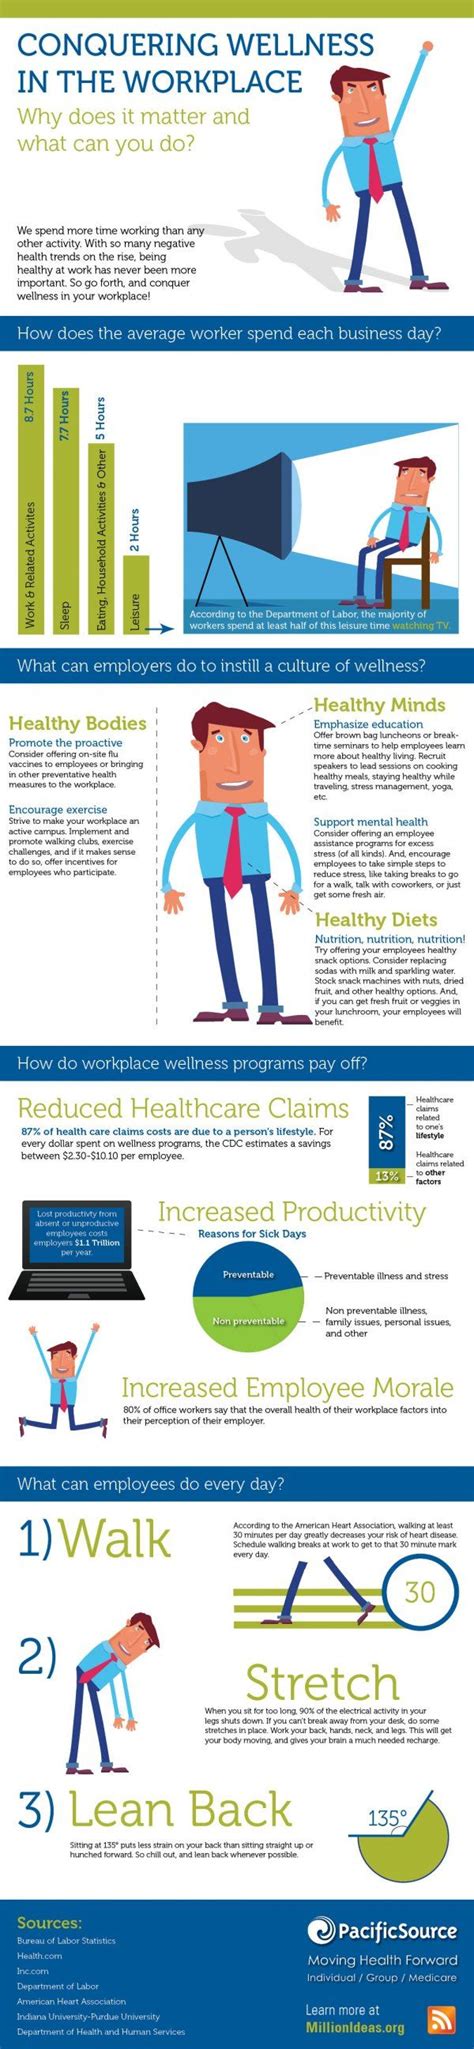 Infographic Conquering Workplace Wellness Workplace Wellness Health